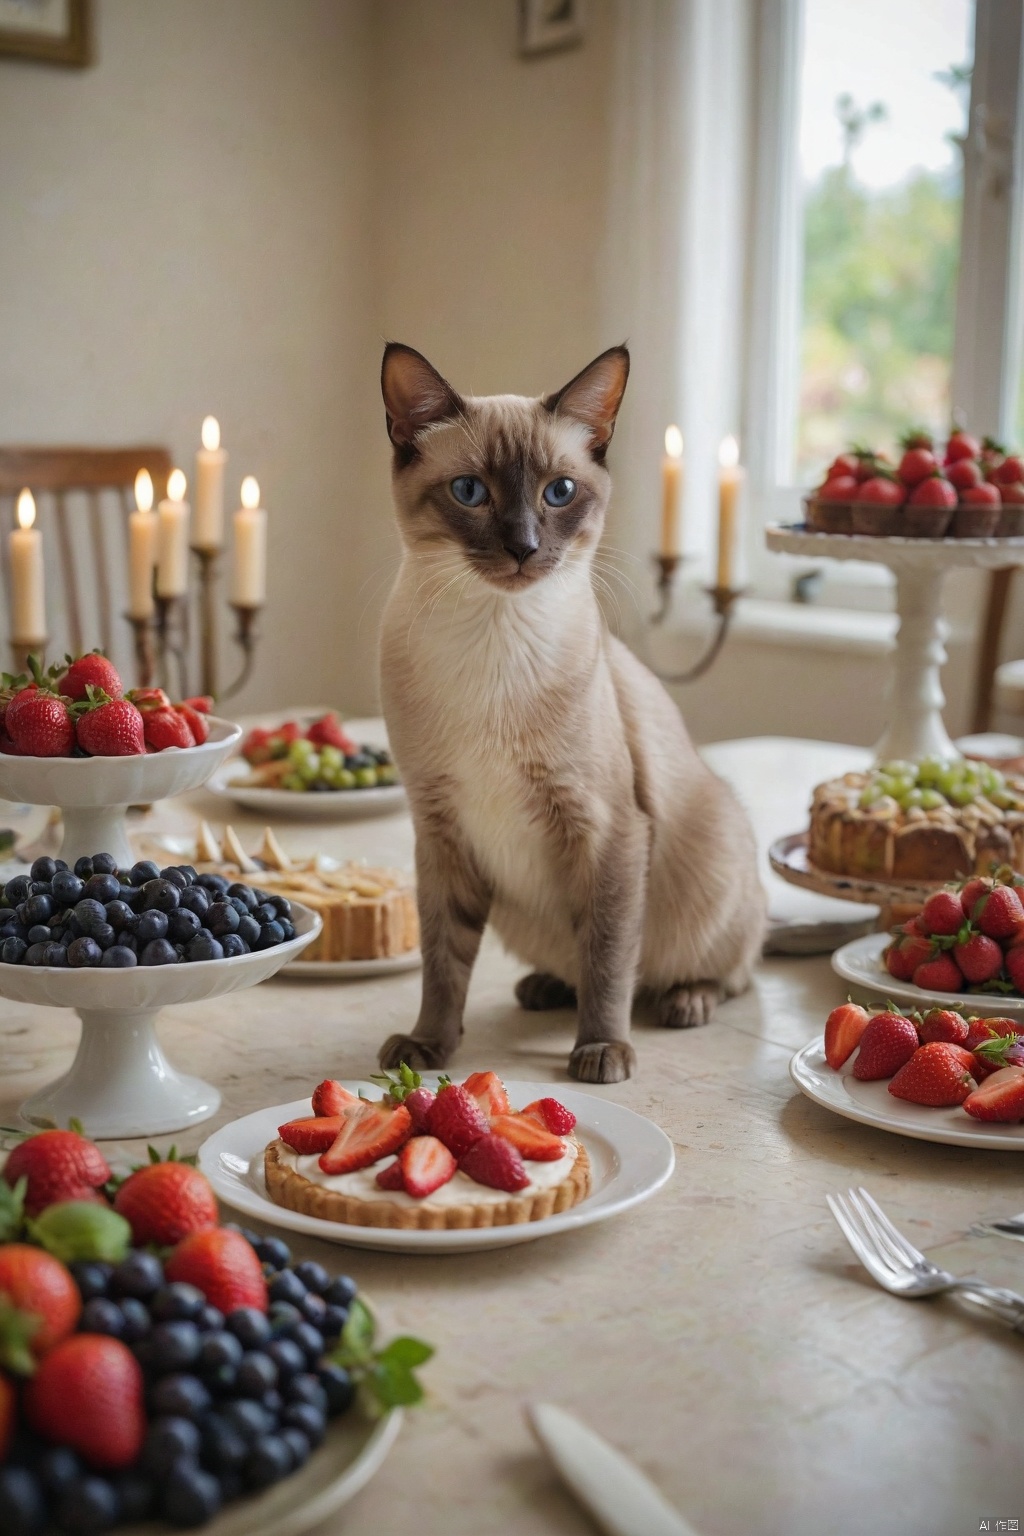  score_9, score_8_up, score_7_up, score_6_up, score_5_up, score_4_up,
Food, Indoor, Blur, no people, fruit, Depth of Field, animals, table, Siamese cat, plate, cake, Reality, strawberries, candles, Animal focus, grapes, Food focus, Blueberries